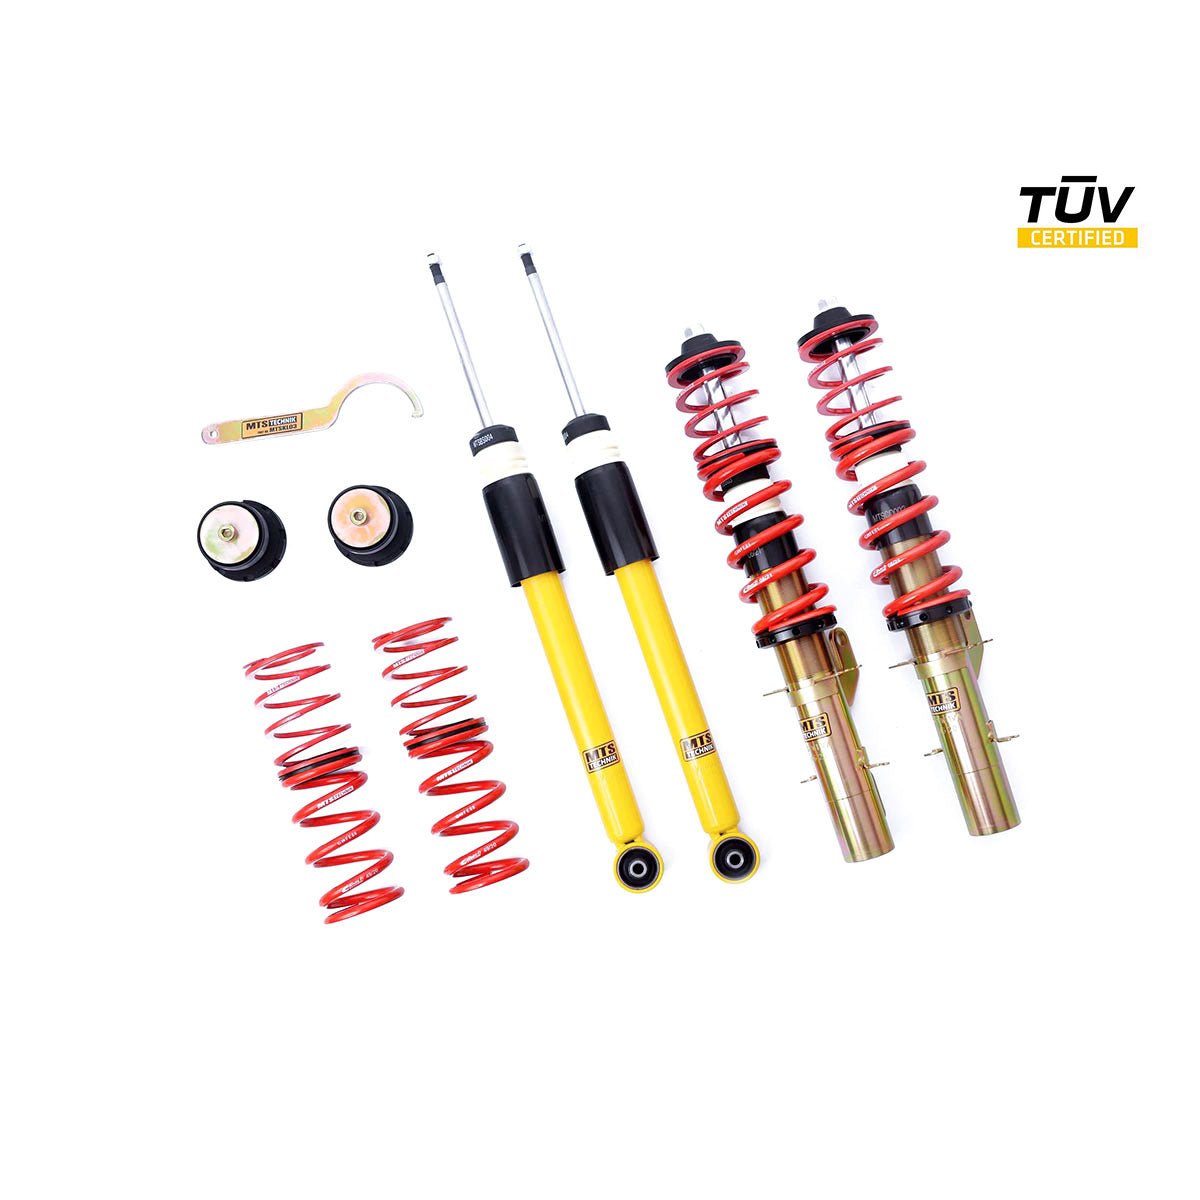 MTS TECHNIK coilover kit SPORT Audi TT 8N Coupe (with TÜV) - PARTS33 GmbH